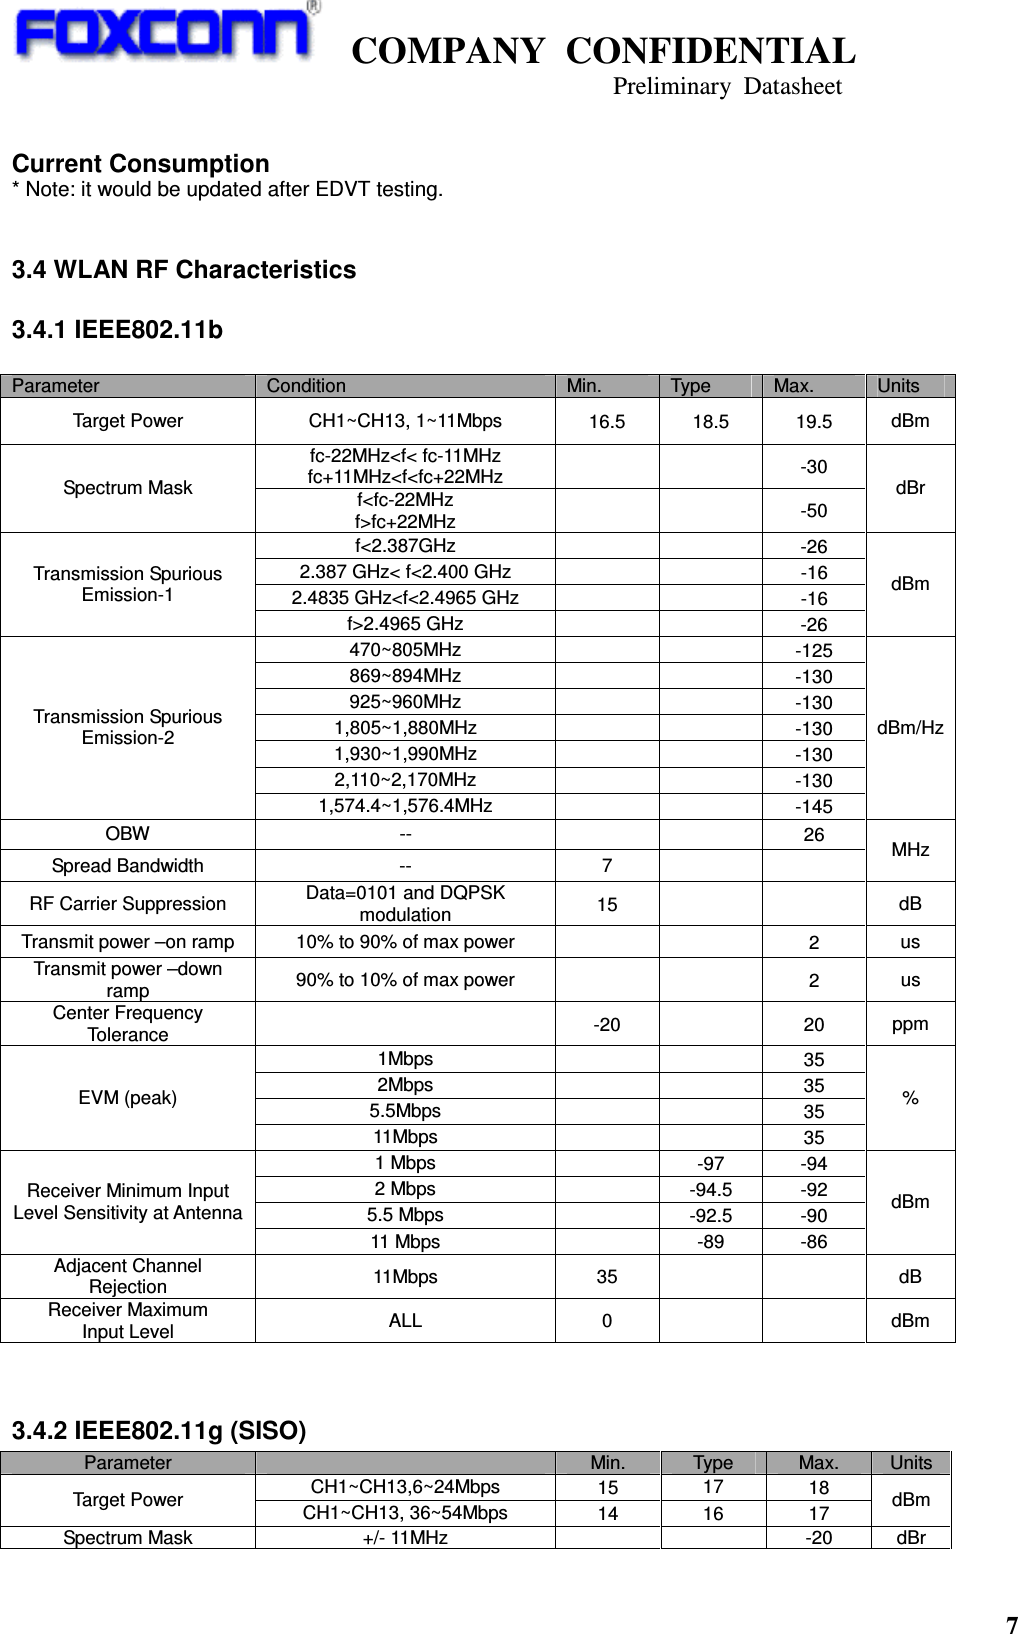    COMPANY  CONFIDENTIAL                                                                     Preliminary  Datasheet 7    Current Consumption * Note: it would be updated after EDVT testing.  3.4 WLAN RF Characteristics 3.4.1 IEEE802.11b  Parameter  Condition  Min.  Type  Max.  Units Target Power  CH1~CH13, 1~11Mbps  16.5  18.5  19.5  dBm fc-22MHz&lt;f&lt; fc-11MHz fc+11MHz&lt;f&lt;fc+22MHz      -30 Spectrum Mask  f&lt;fc-22MHz f&gt;fc+22MHz      -50 dBr f&lt;2.387GHz      -26 2.387 GHz&lt; f&lt;2.400 GHz      -16 2.4835 GHz&lt;f&lt;2.4965 GHz      -16 Transmission Spurious Emission-1 f&gt;2.4965 GHz      -26 dBm 470~805MHz      -125 869~894MHz      -130 925~960MHz      -130 1,805~1,880MHz      -130 1,930~1,990MHz      -130 2,110~2,170MHz      -130 Transmission Spurious Emission-2 1,574.4~1,576.4MHz      -145 dBm/Hz OBW  --      26 Spread Bandwidth  --  7      MHz RF Carrier Suppression  Data=0101 and DQPSK modulation  15      dB Transmit power –on ramp  10% to 90% of max power      2  us Transmit power –down ramp  90% to 10% of max power      2  us Center Frequency Tolerance   -20    20  ppm 1Mbps      35 2Mbps      35 5.5Mbps      35 EVM (peak) 11Mbps      35 % 1 Mbps    -97  -94 2 Mbps    -94.5  -92 5.5 Mbps    -92.5  -90 Receiver Minimum Input Level Sensitivity at Antenna 11 Mbps    -89  -86 dBm Adjacent Channel Rejection  11Mbps  35      dB Receiver Maximum Input Level  ALL  0      dBm   3.4.2 IEEE802.11g (SISO) Parameter    Min.  Type  Max.  Units CH1~CH13,6~24Mbps  15  17 18 Target Power  CH1~CH13, 36~54Mbps  14  16  17  dBm Spectrum Mask  +/- 11MHz      -20  dBr 